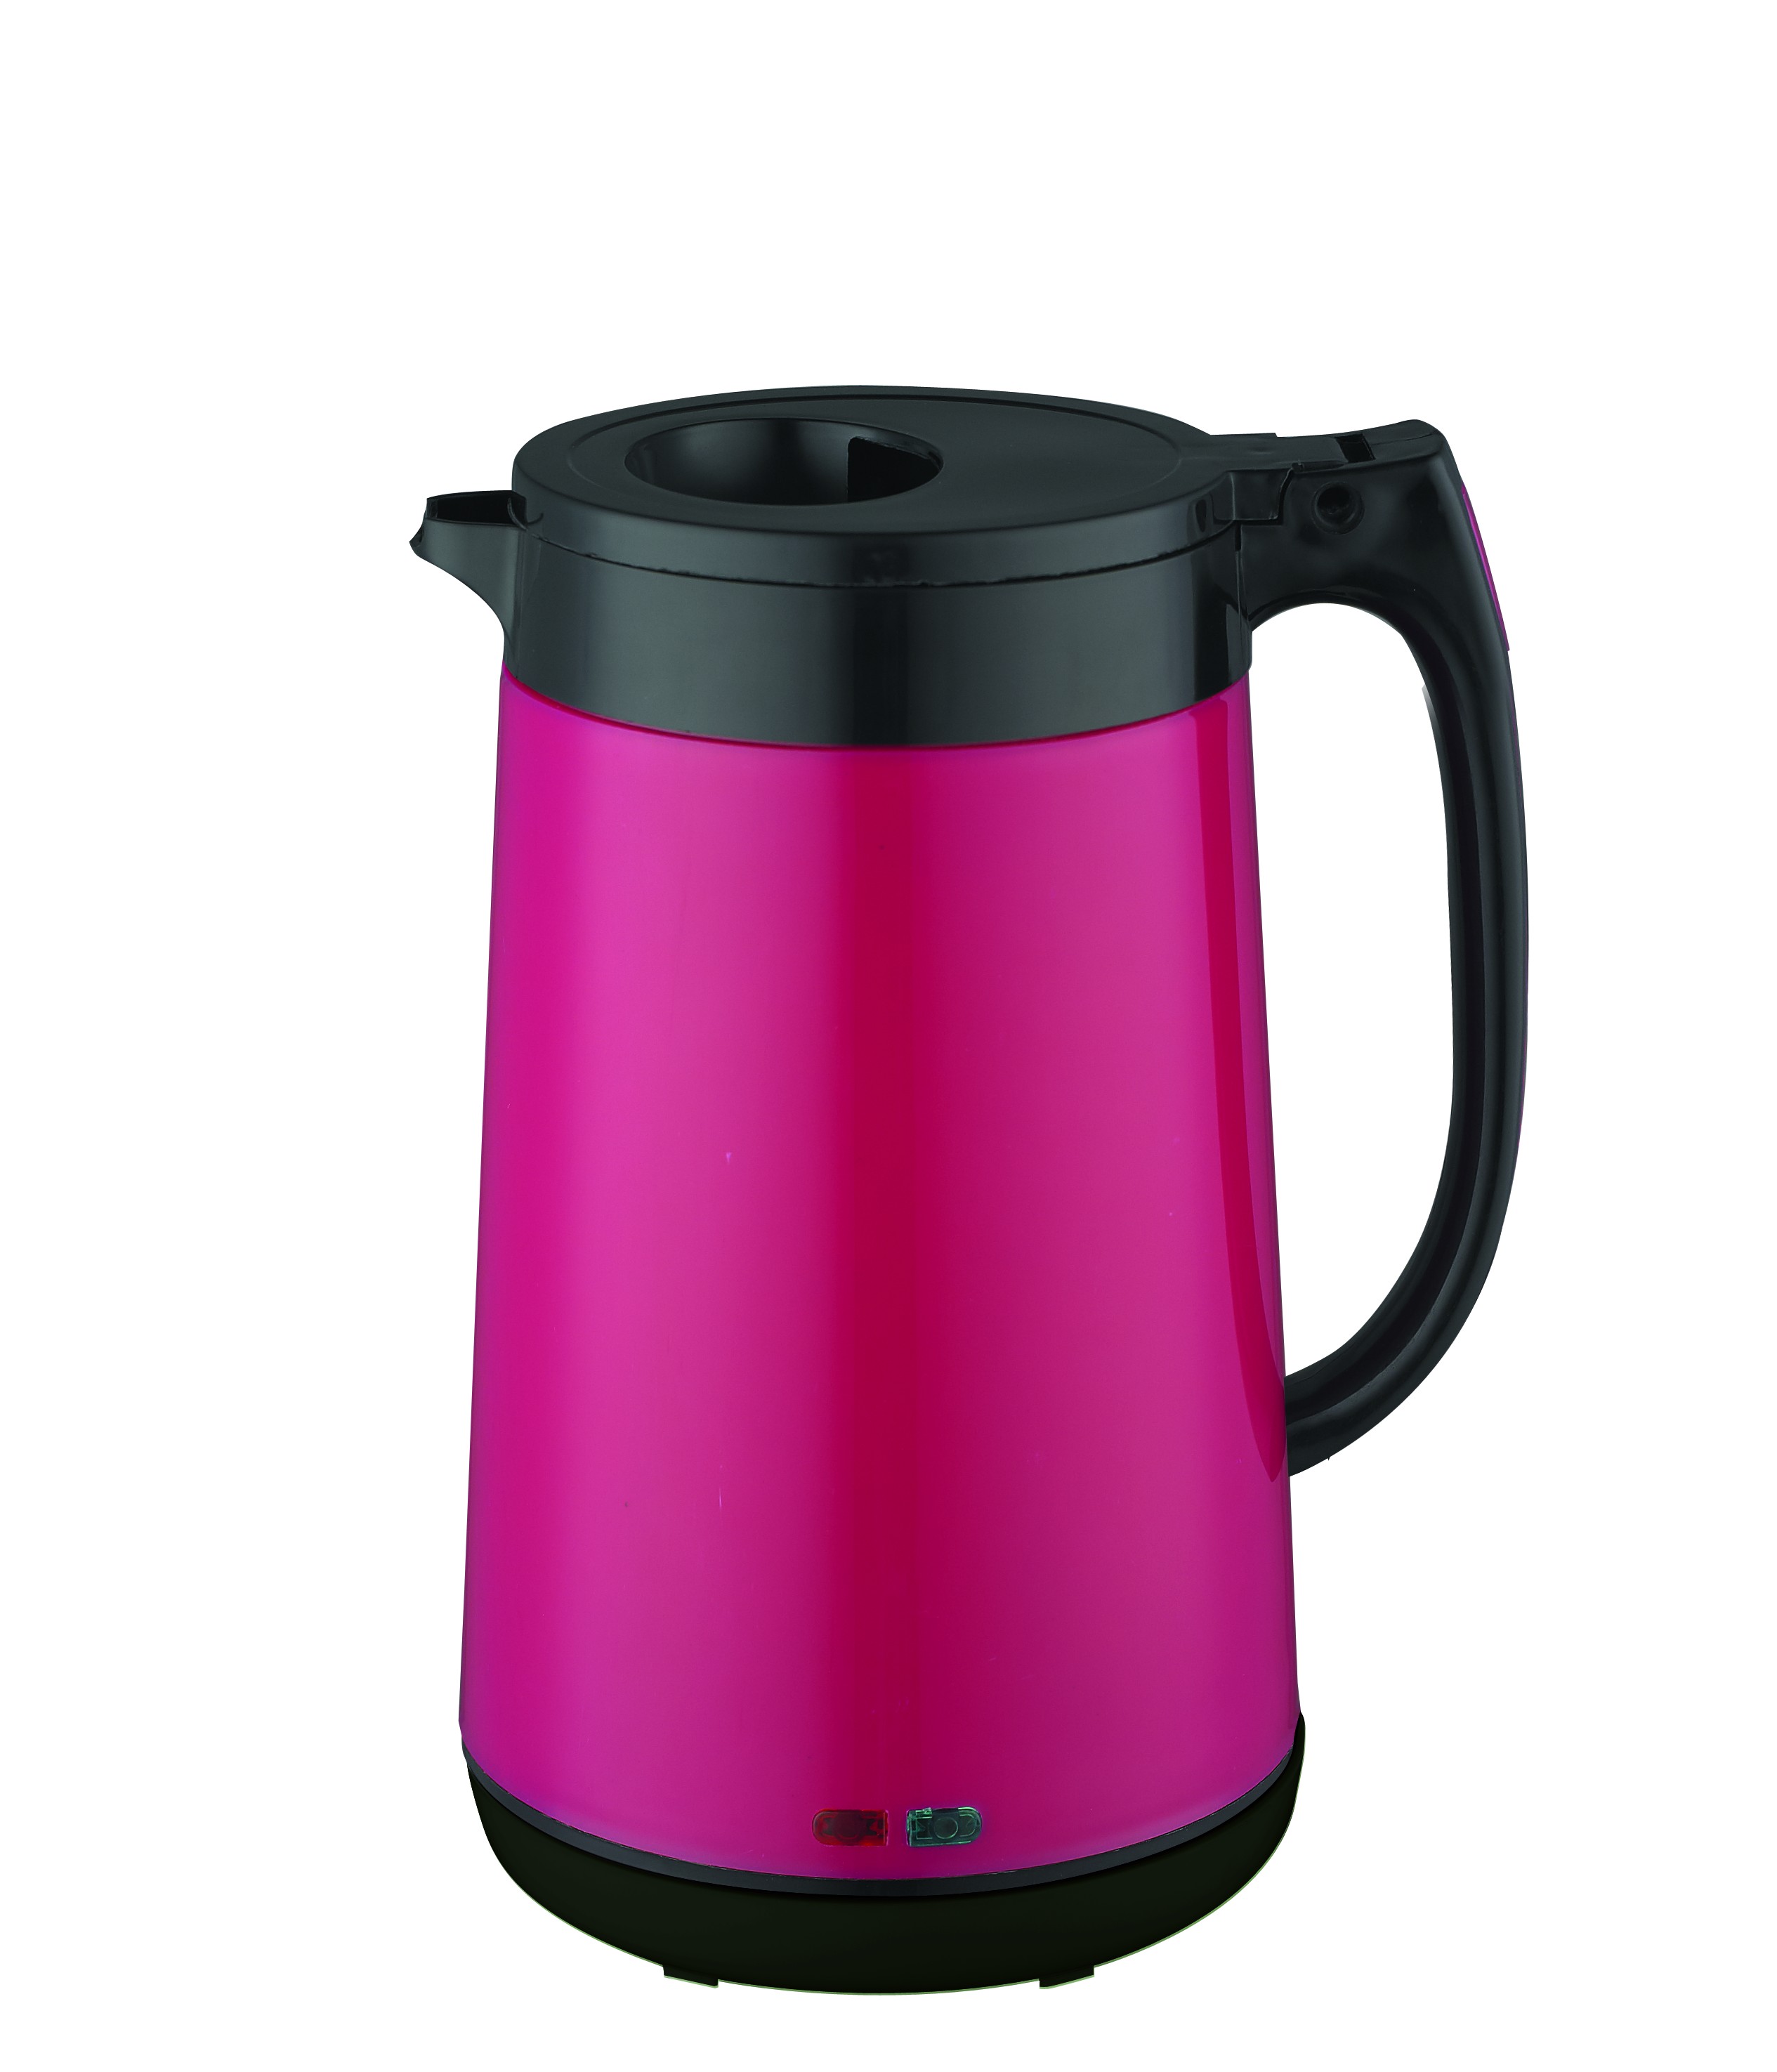 Double anti hot insulation stainless steel electric kettle